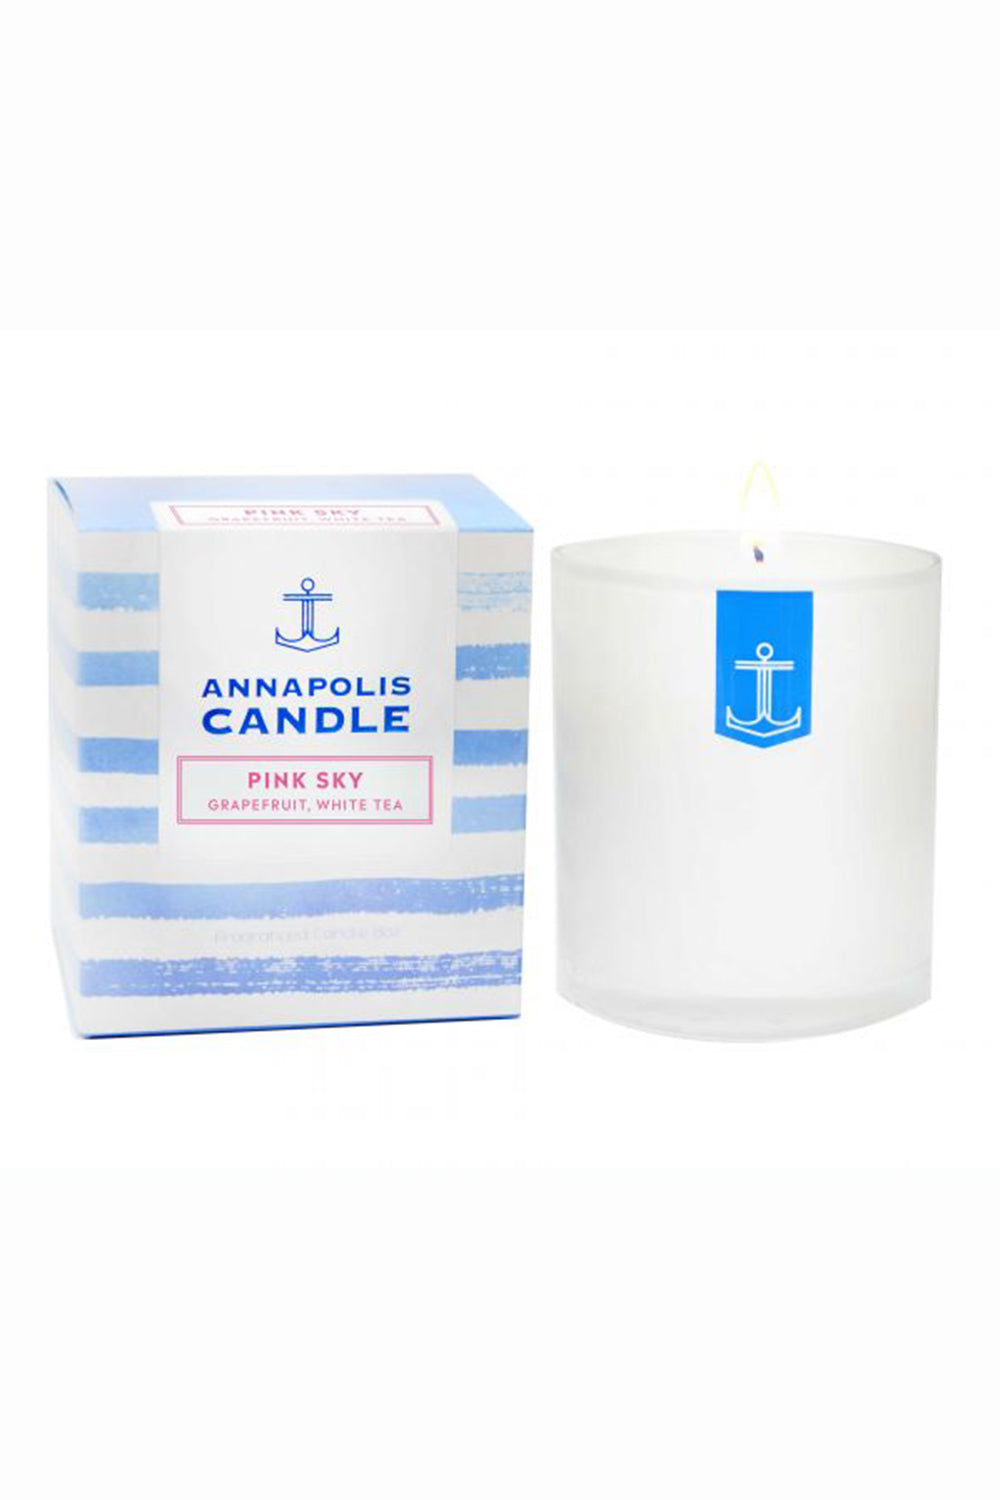 Boxed Annapolis Candle - Pink Sky